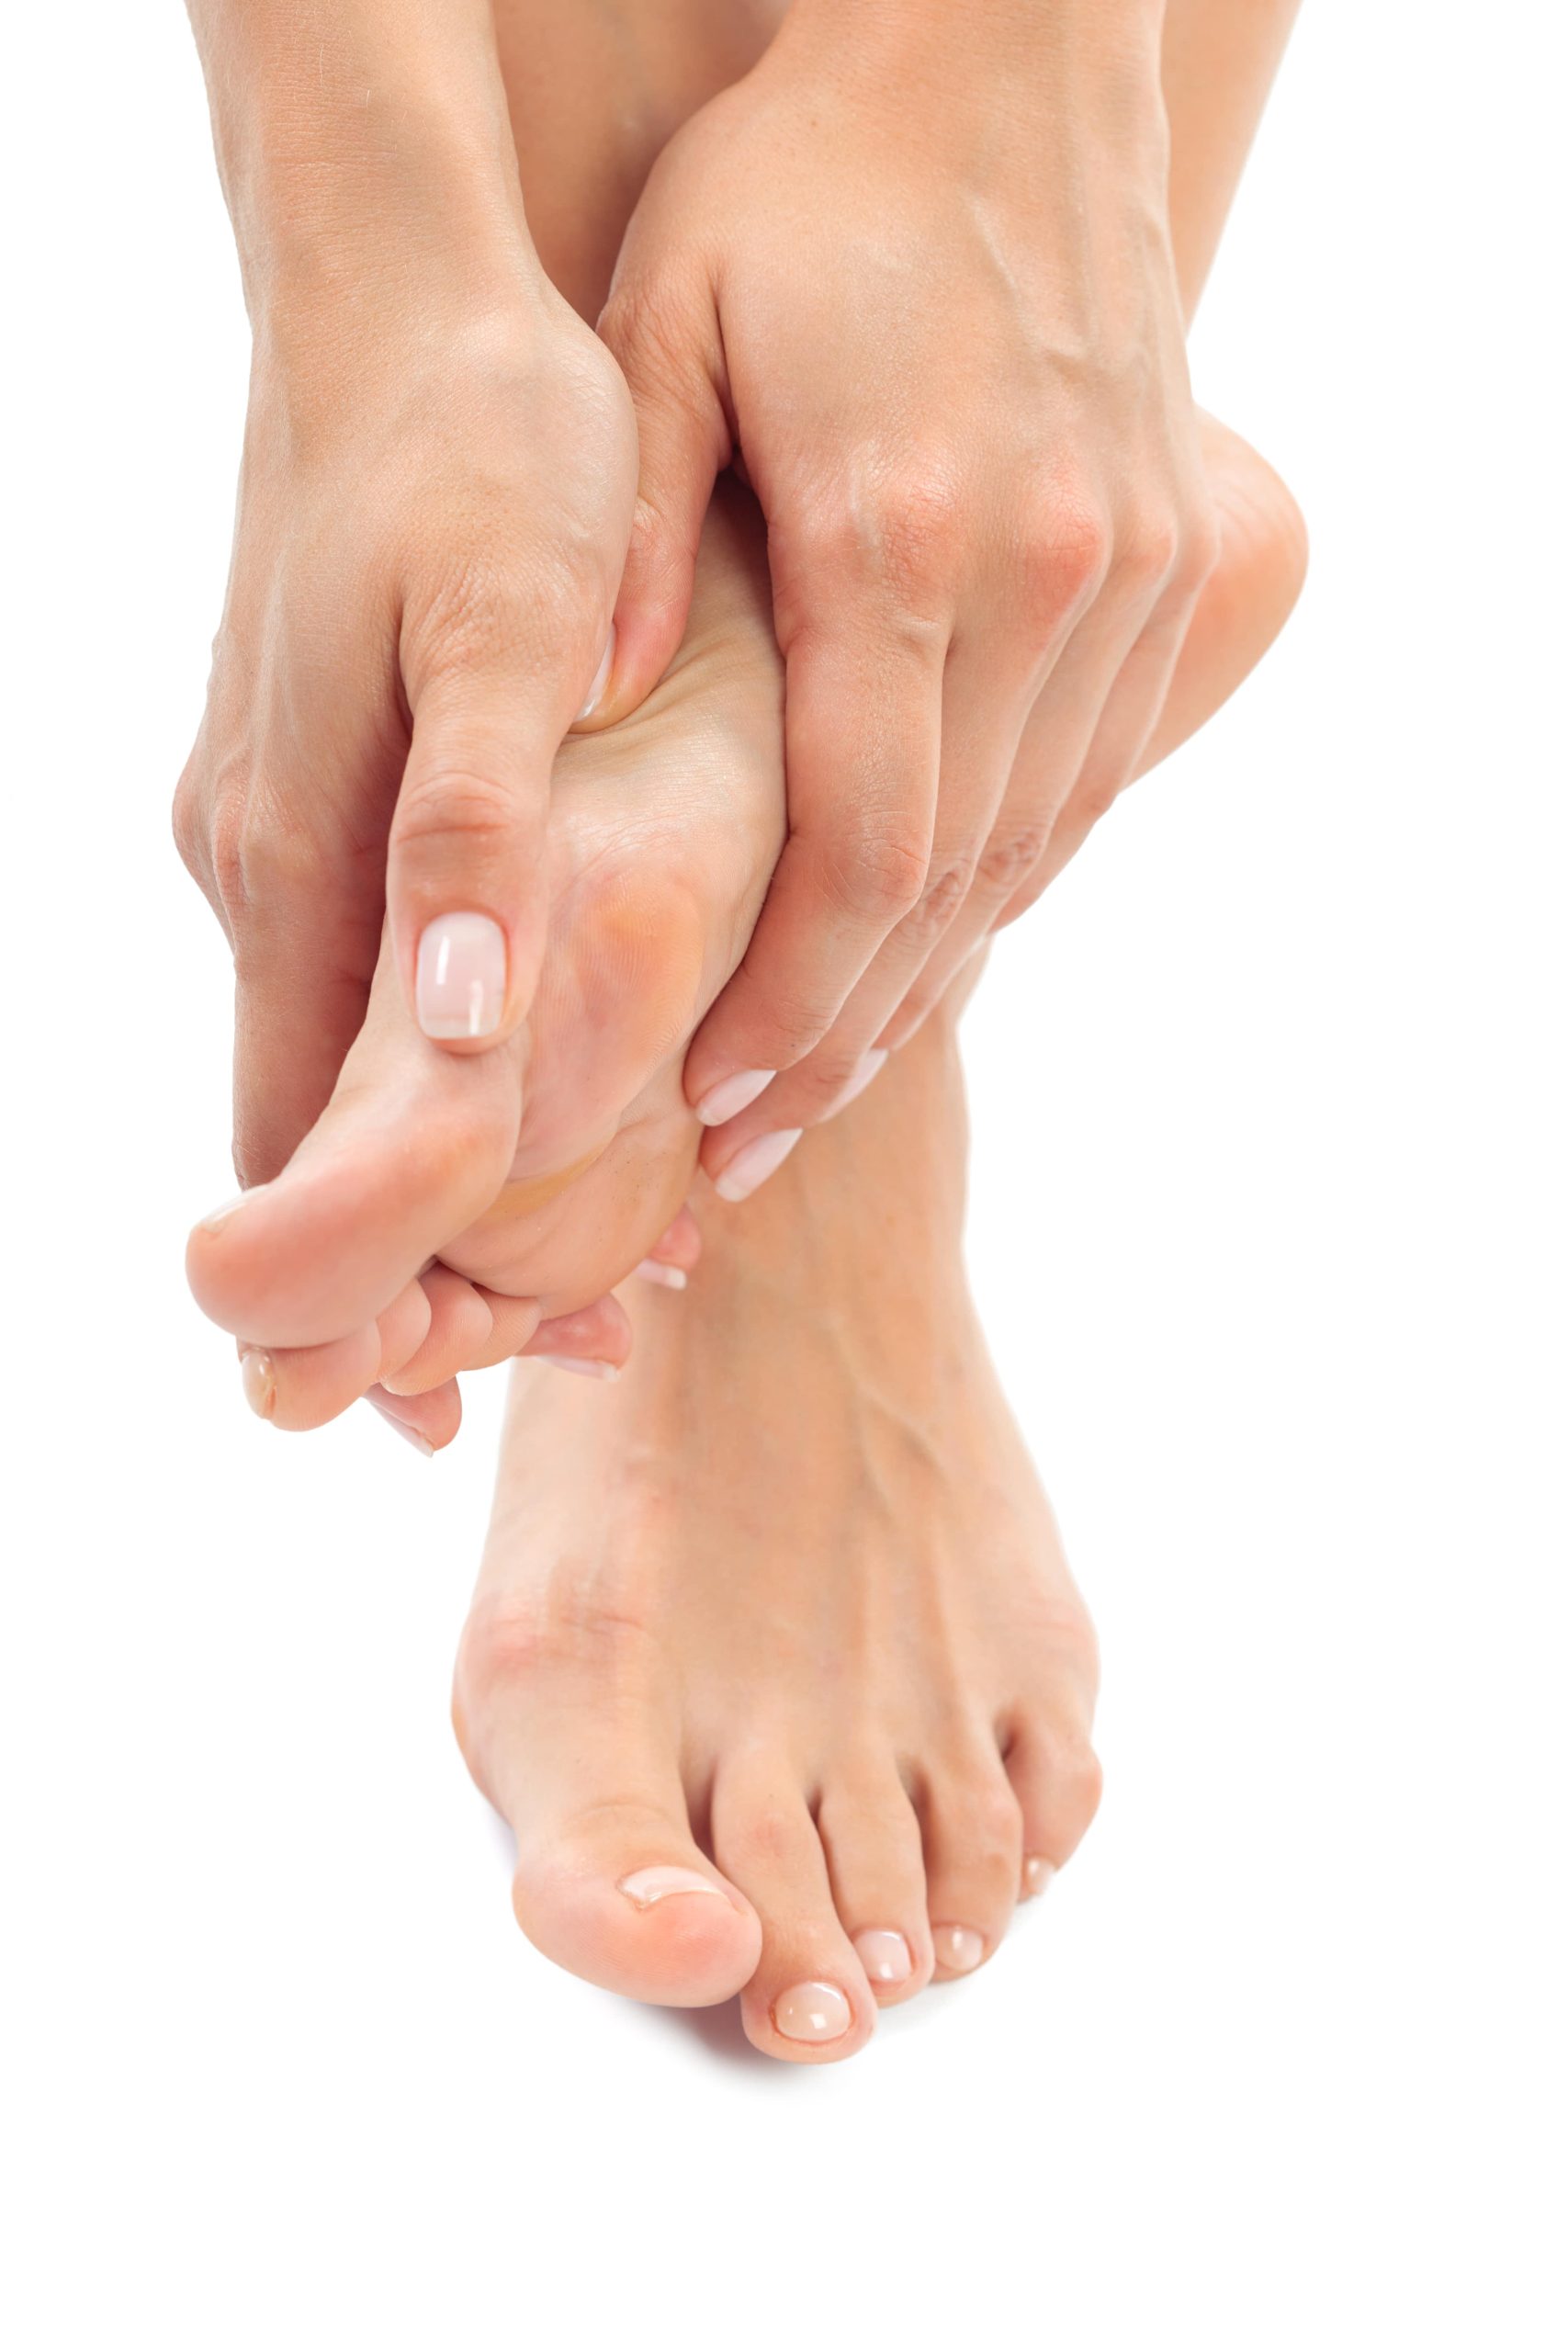 Five Major Causes of Persistently Cold Feet - Priority Podiatry